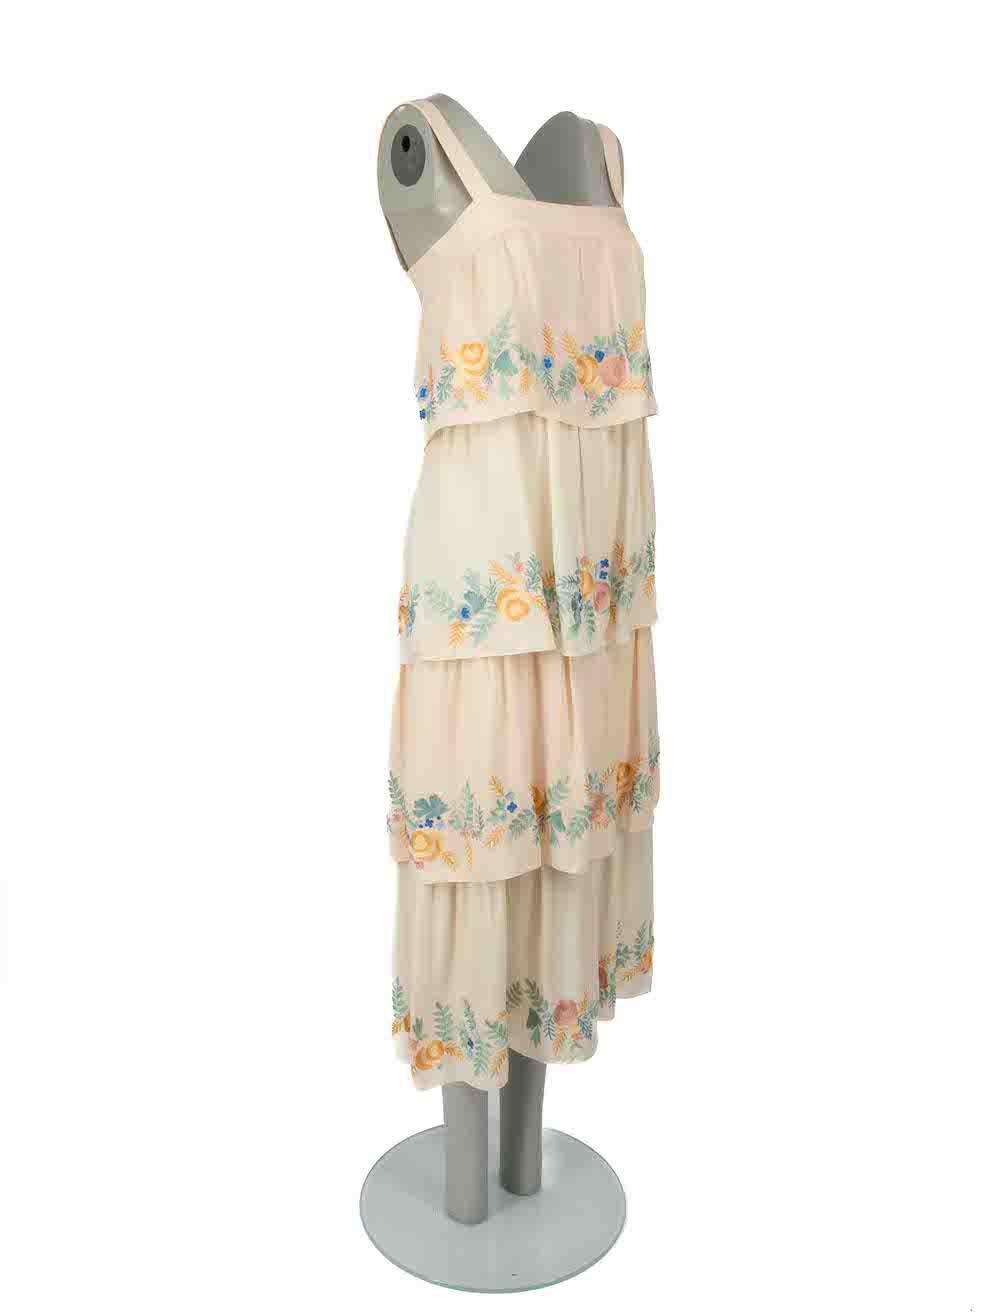 CONDITION is Very good. Minimal wear to dress is evident. Minimal discolouration on the front top tier and left side of skirt. Small hole is visible on the rear lining on this used Vilshenko designer resale item.
  
Details
Cream
Silk
Dress
Floral